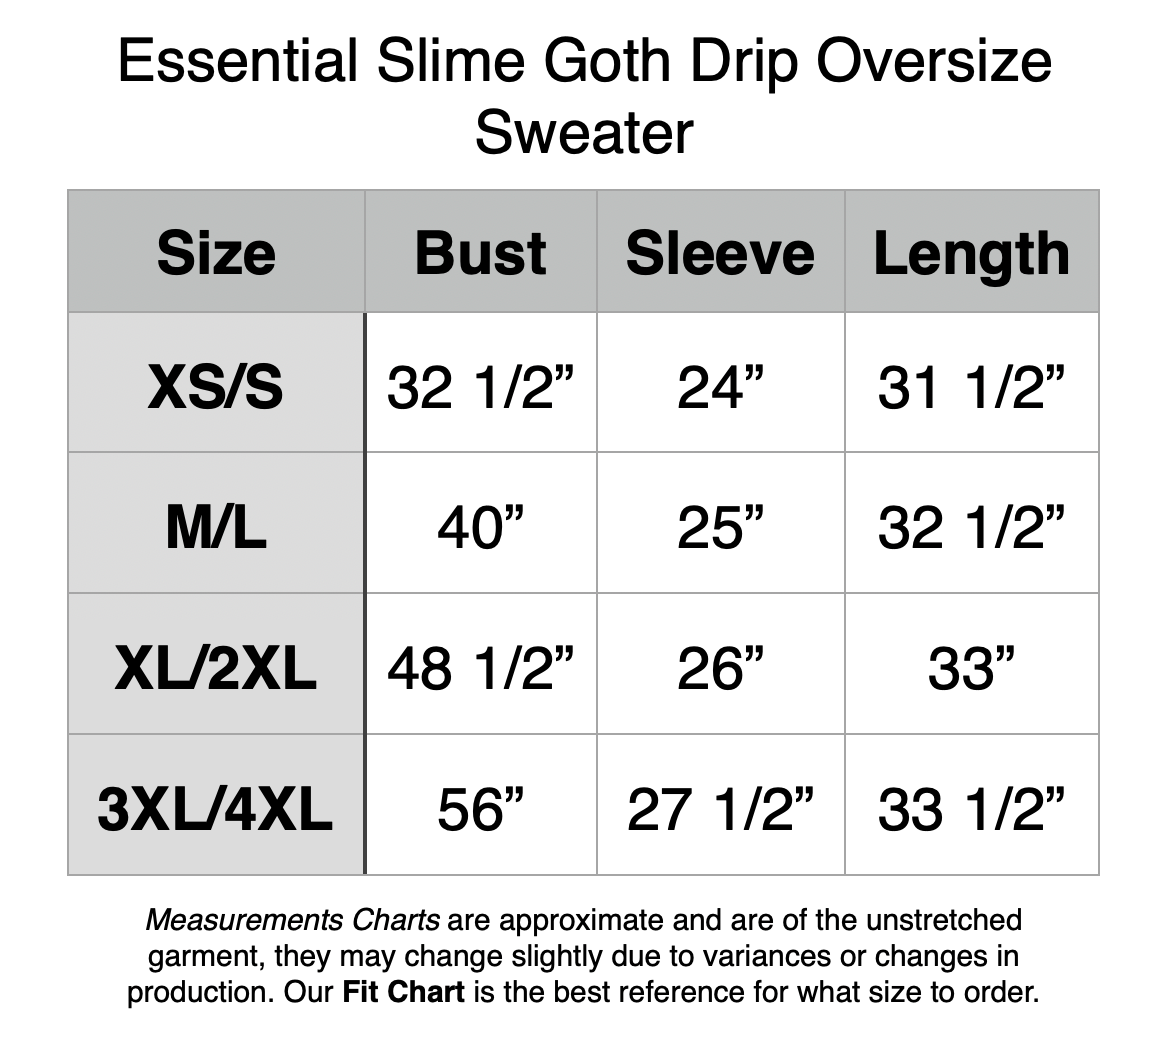 Essential Slime Goth Drip Oversize Sweater - XS/S: 32.5" Bust, 24" Sleeve Length, 31.5" Back Length. M/L: 40" Bust, 25" Sleeve Length, 32.5" Back Length. XL/2XL: 48.5" Bust, 26" Sleeve Length, 33" Back Length. 3XL/34L: 56" Bust, 27.5" Sleeve Length, 33.5" Back Length.